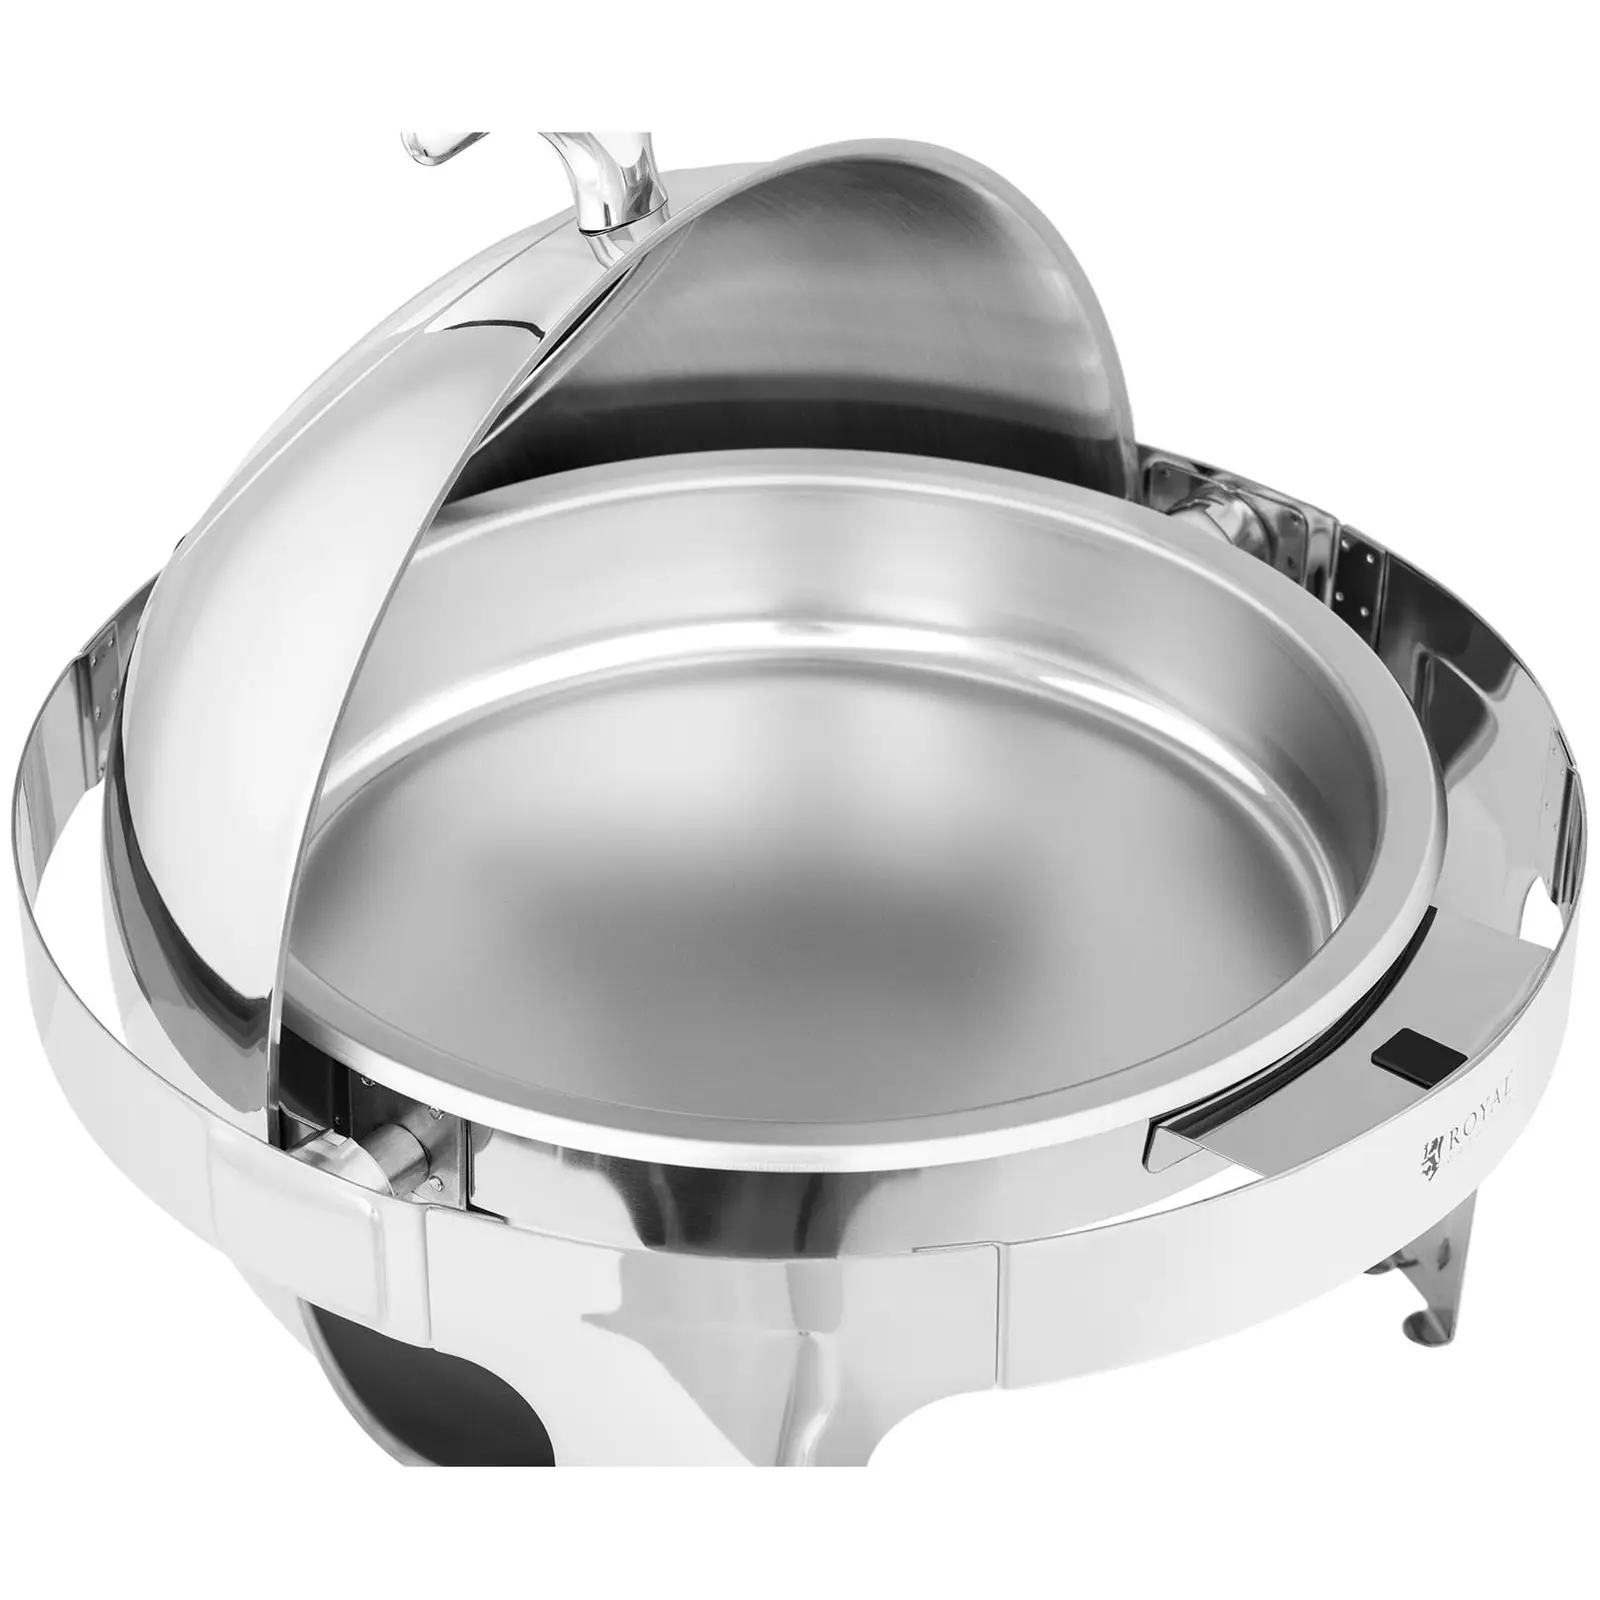 Chafing dish rond - Royal Catering - 5,8 l